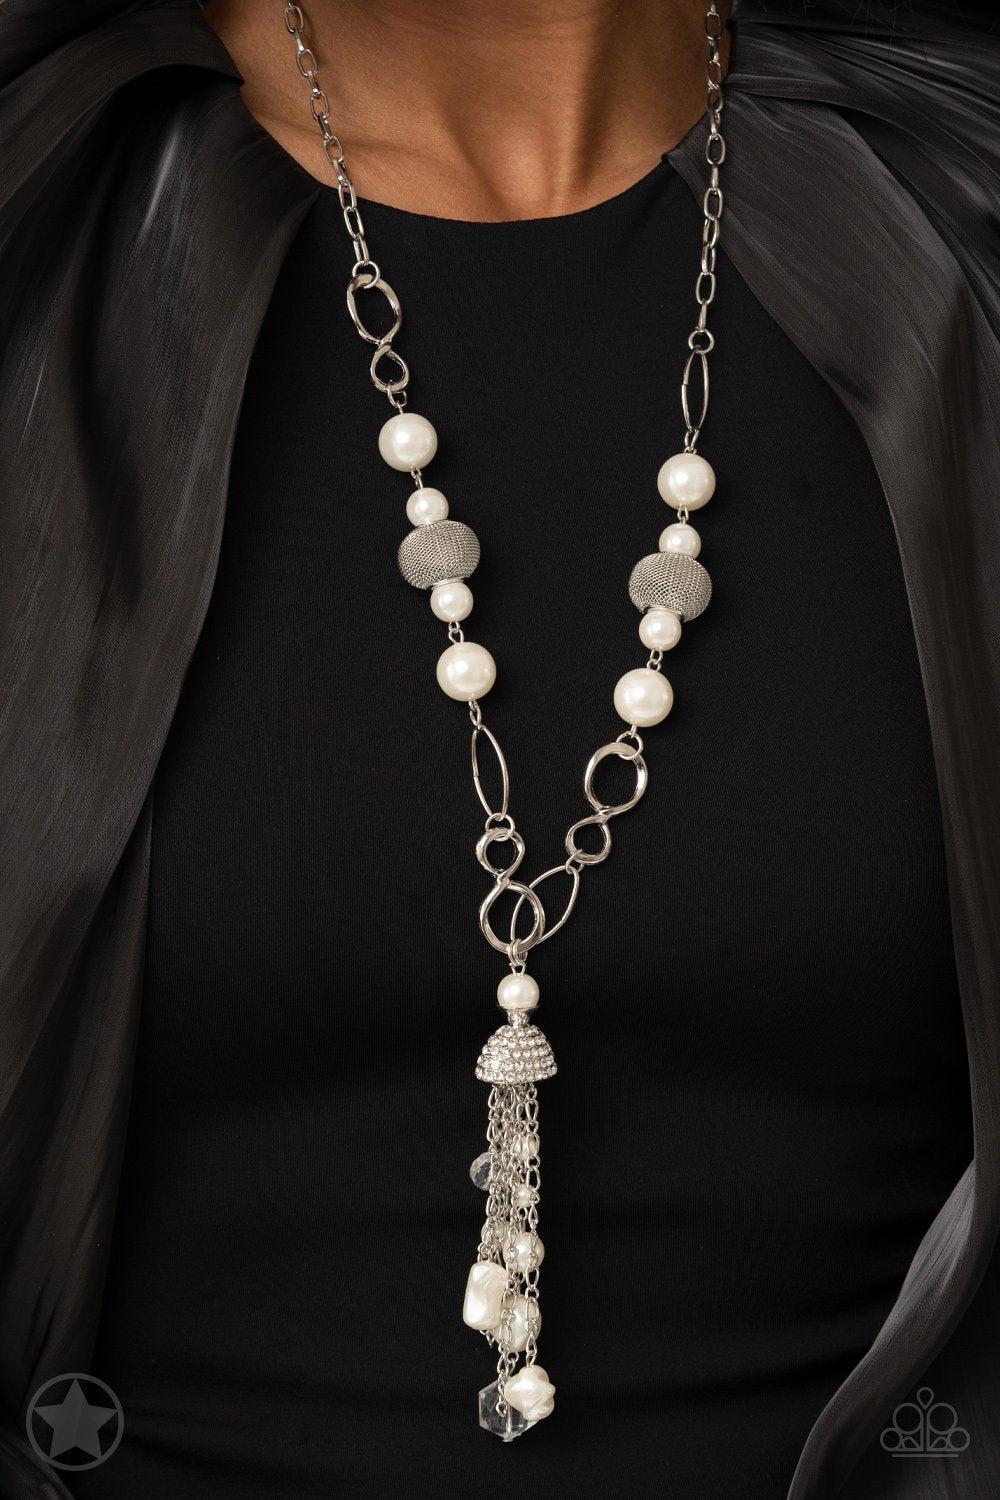 Designated Diva Long White Tassel Necklace and matching Earrings - Paparazzi Accessories - lightbox -CarasShop.com - $5 Jewelry by Cara Jewels